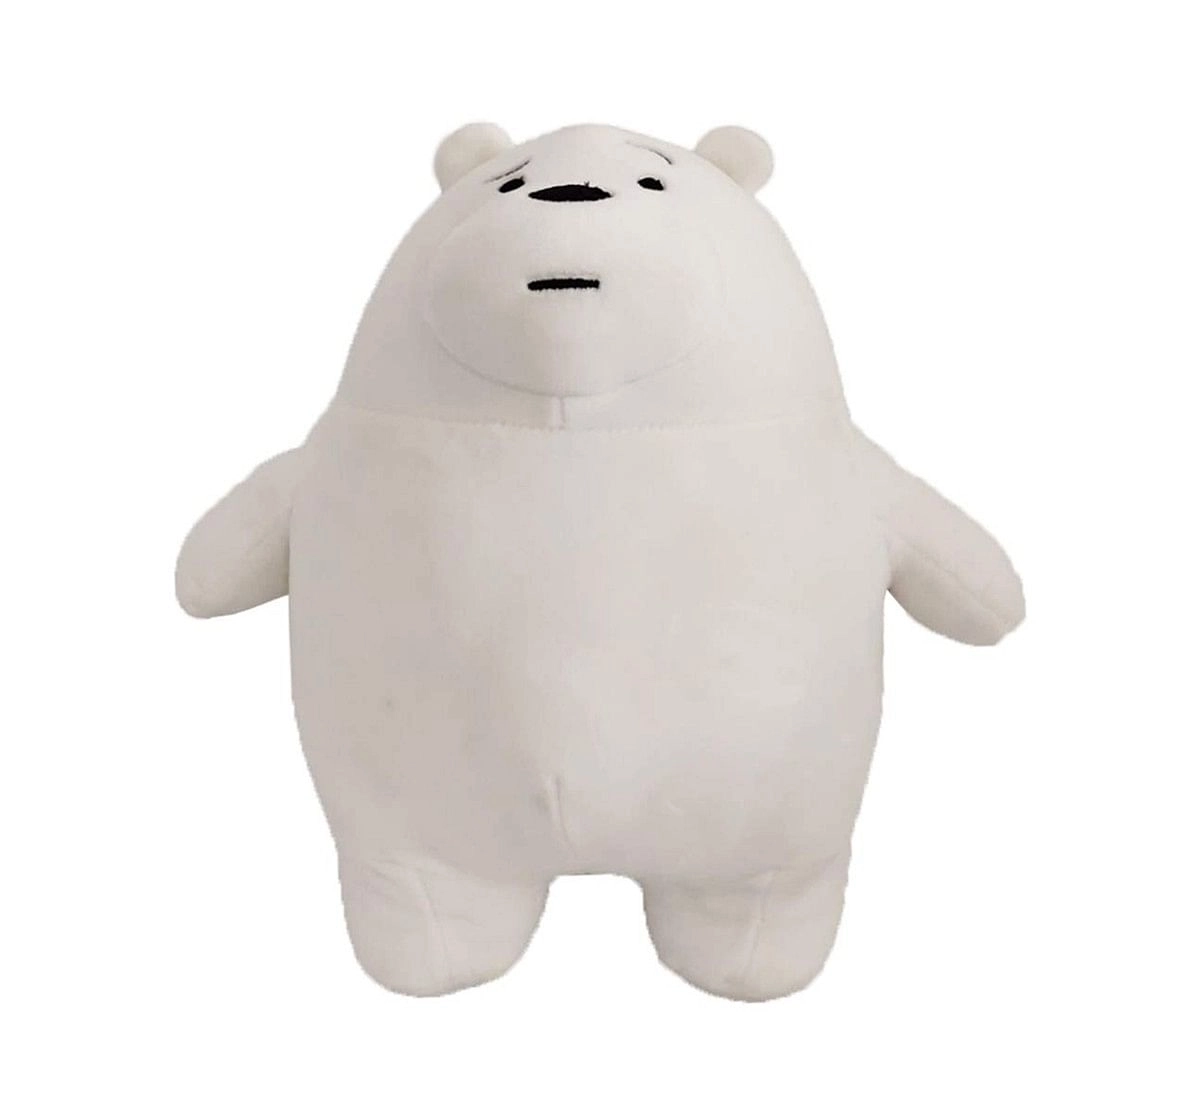  We Bare Bear Ice Bear Plush 30 Cm Toy for Kids age 1Y+ (White)